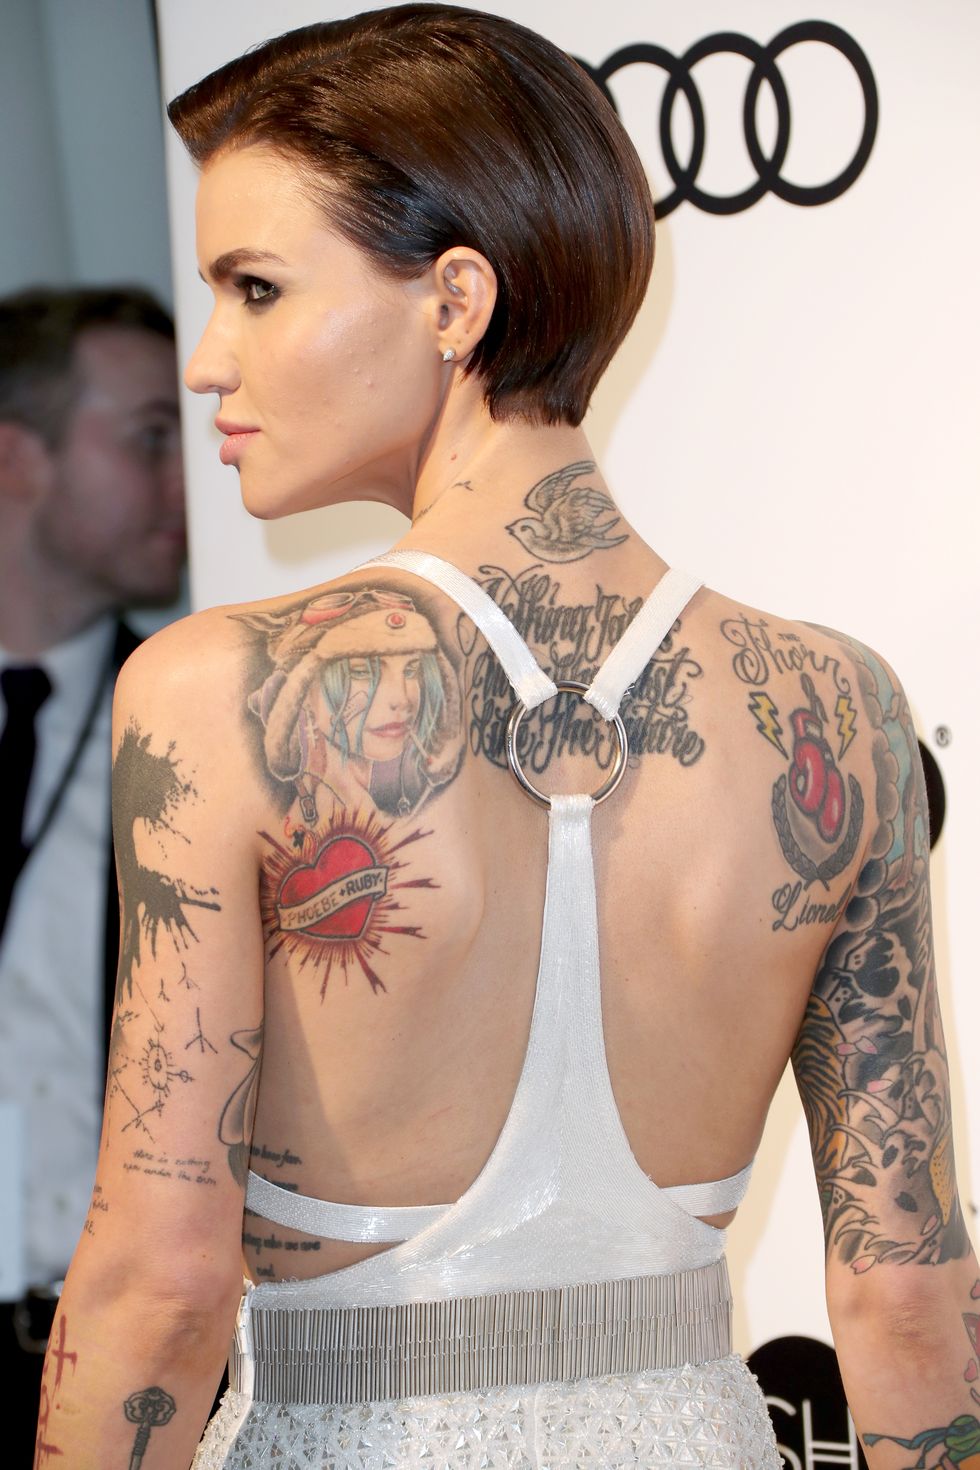 WEST HOLLYWOOD, CA - FEBRUARY 26:  Model Ruby Rose attends the 25th Annual Elton John AIDS Foundation's Academy Awards Viewing Party at The City of West Hollywood Park on February 26, 2017 in West Hollywood, California.  (Photo by Frederick M. Brown/Getty Images)